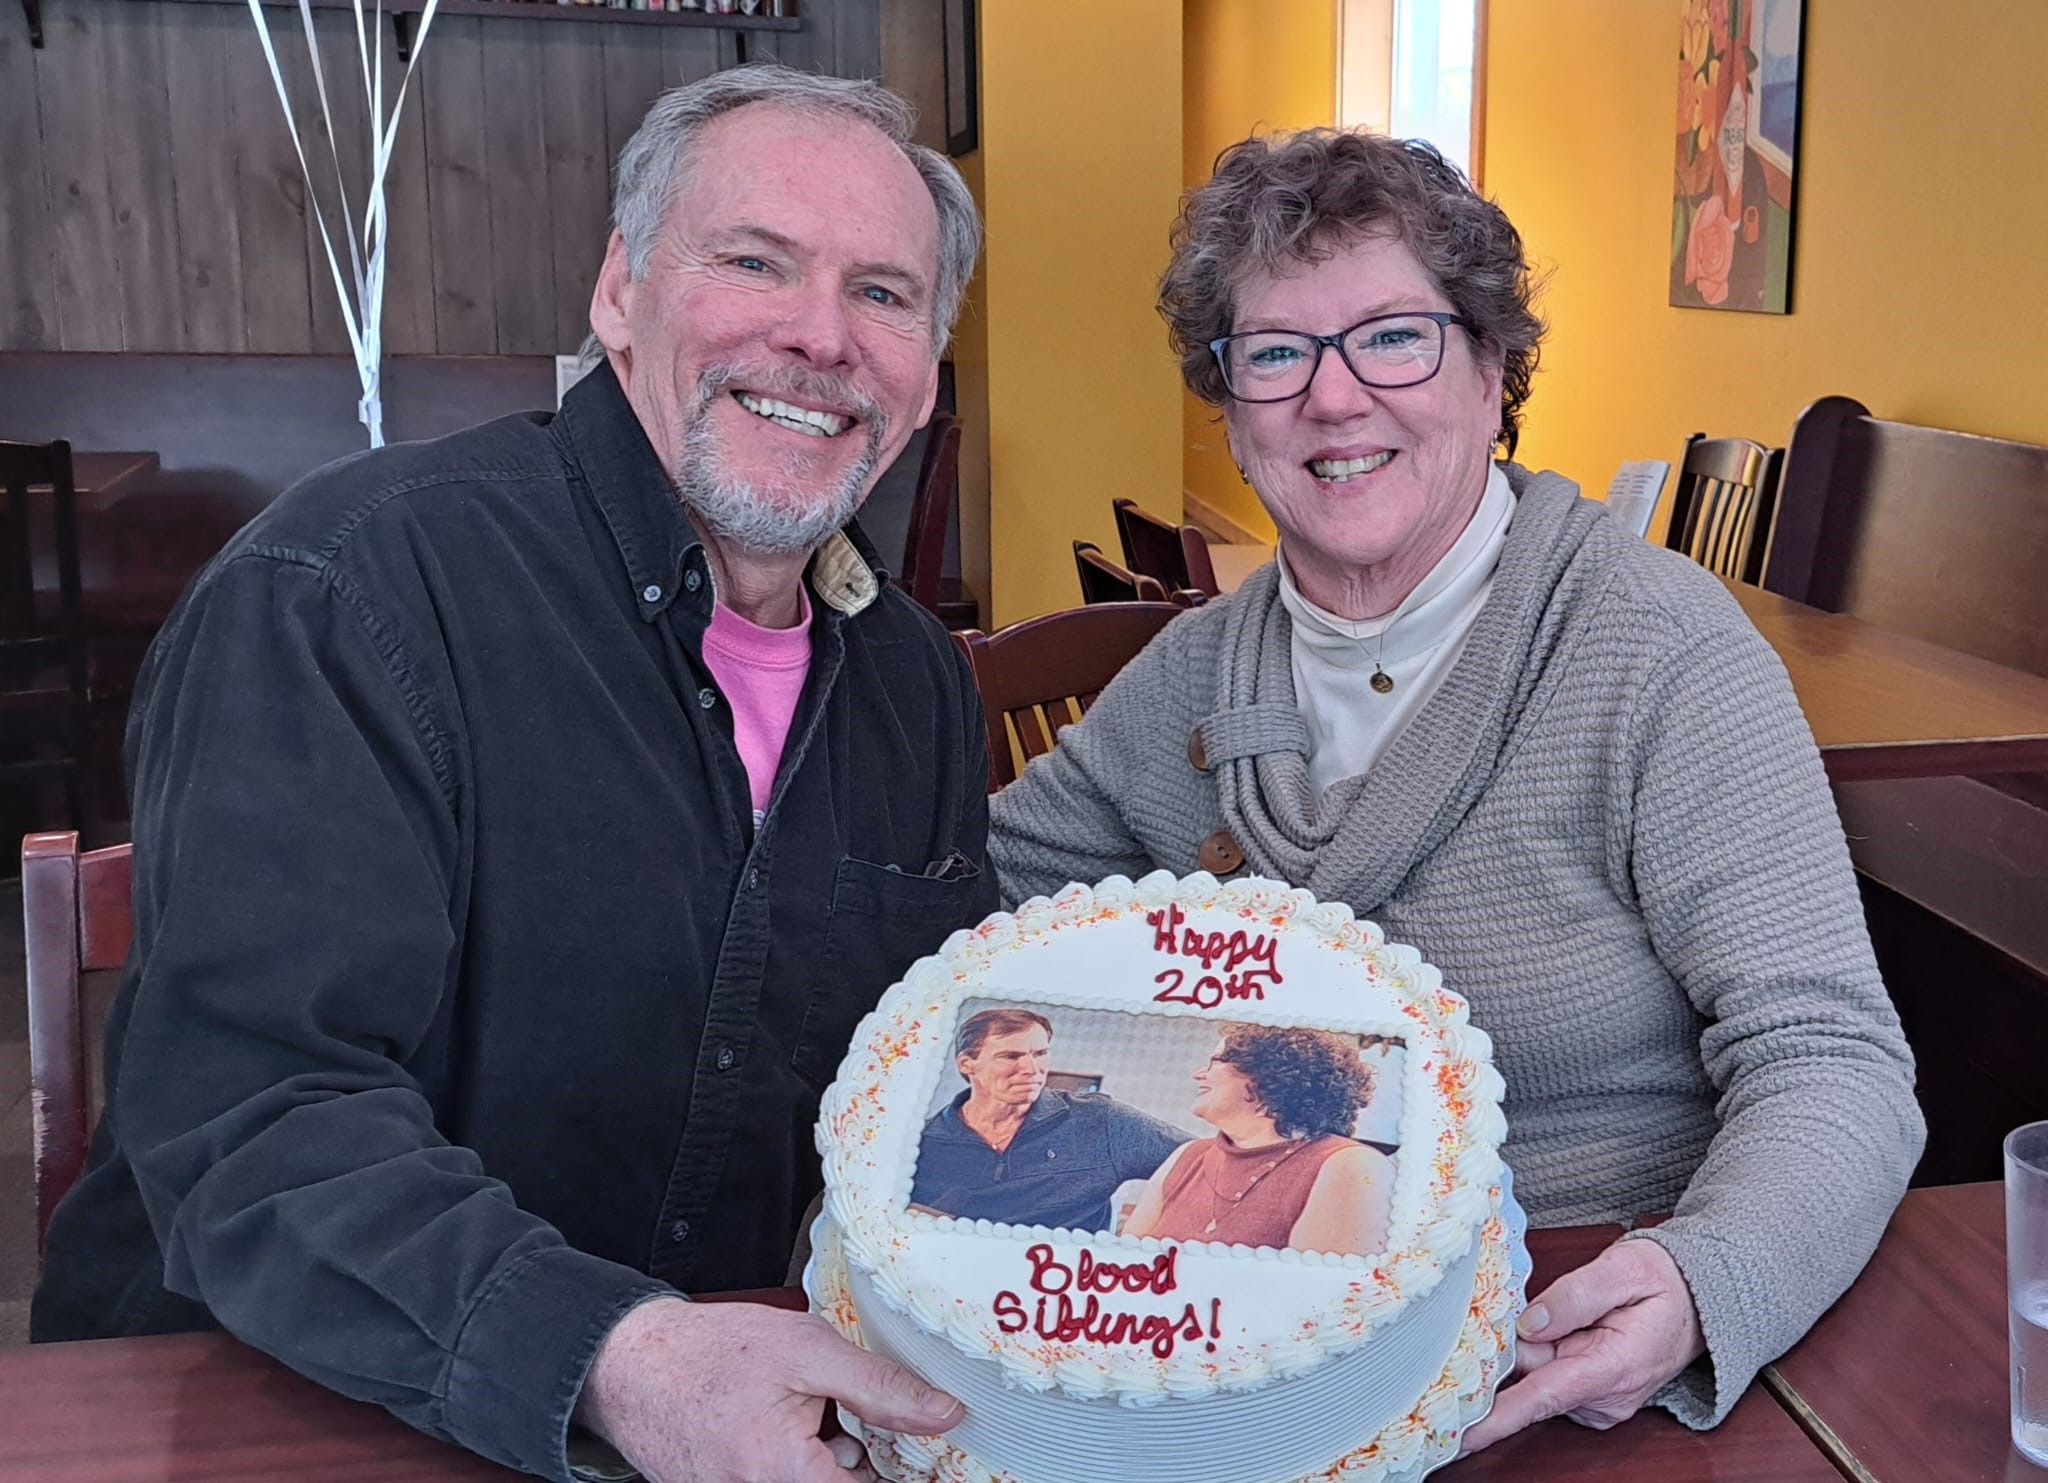 ‘My blood brother’: Donor, recipient reunite 20 years after life-saving transplant